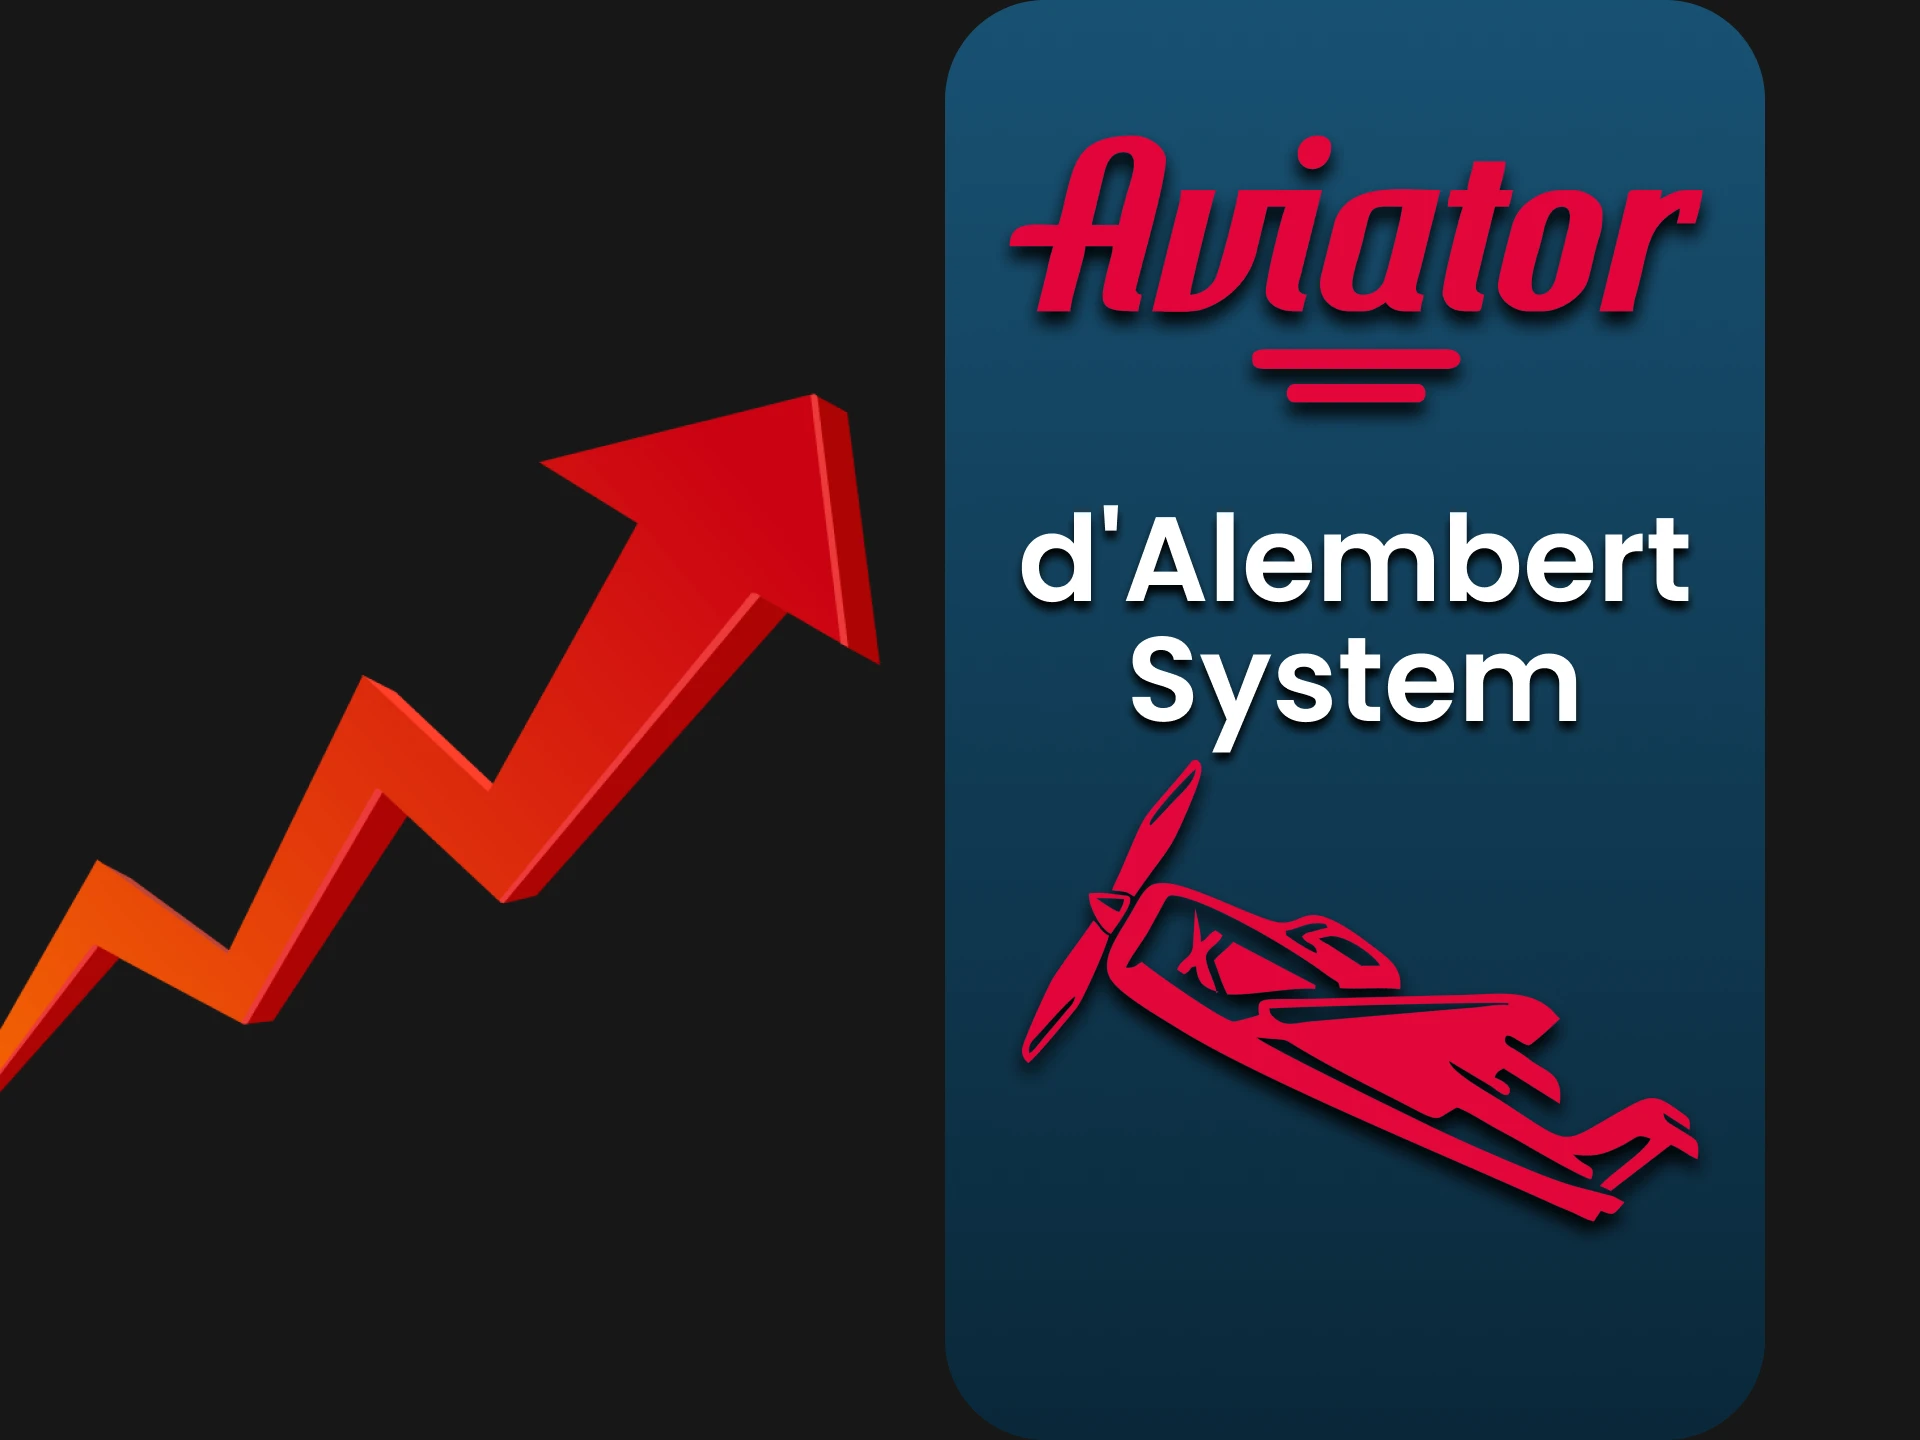 Find out about this system of playing Aviator as d-Alembert.